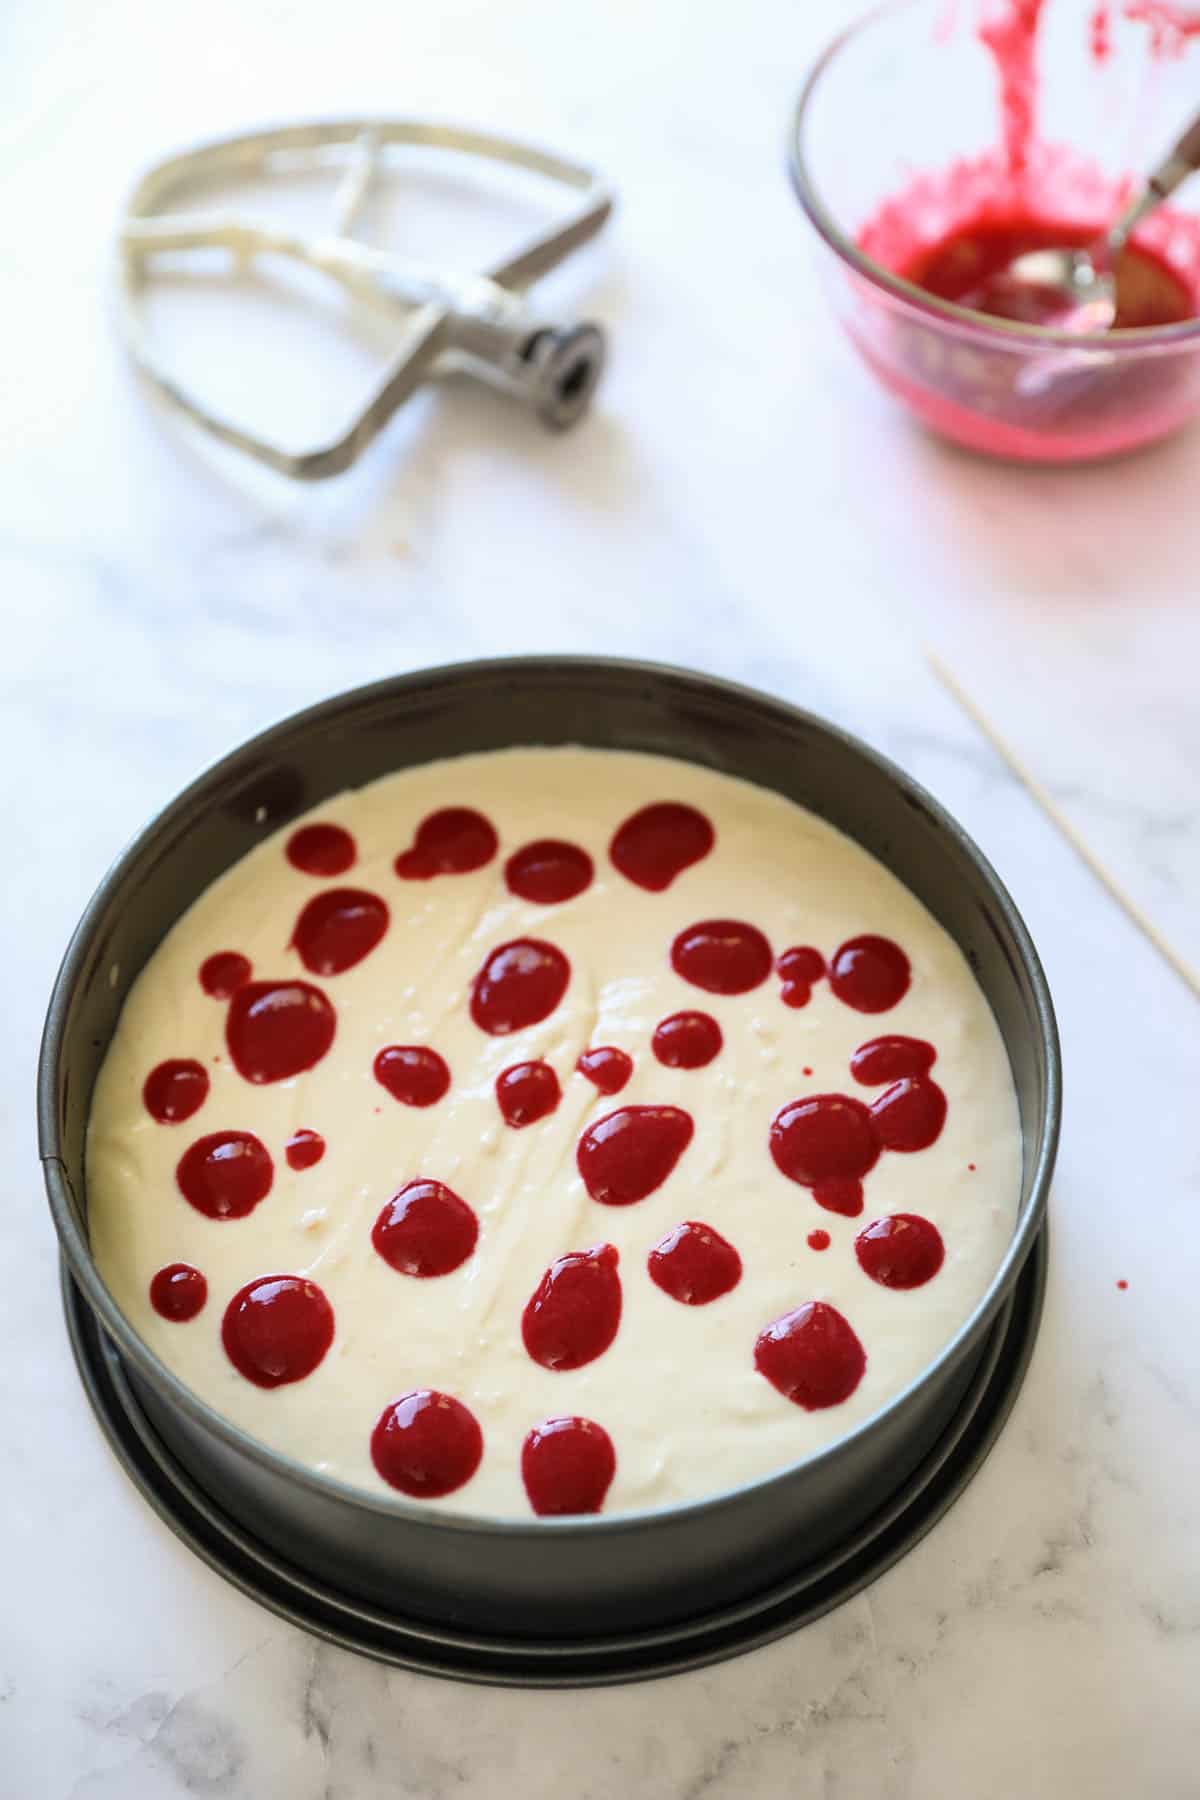 A cheesecake with raspberry puree dots in the center for swirling